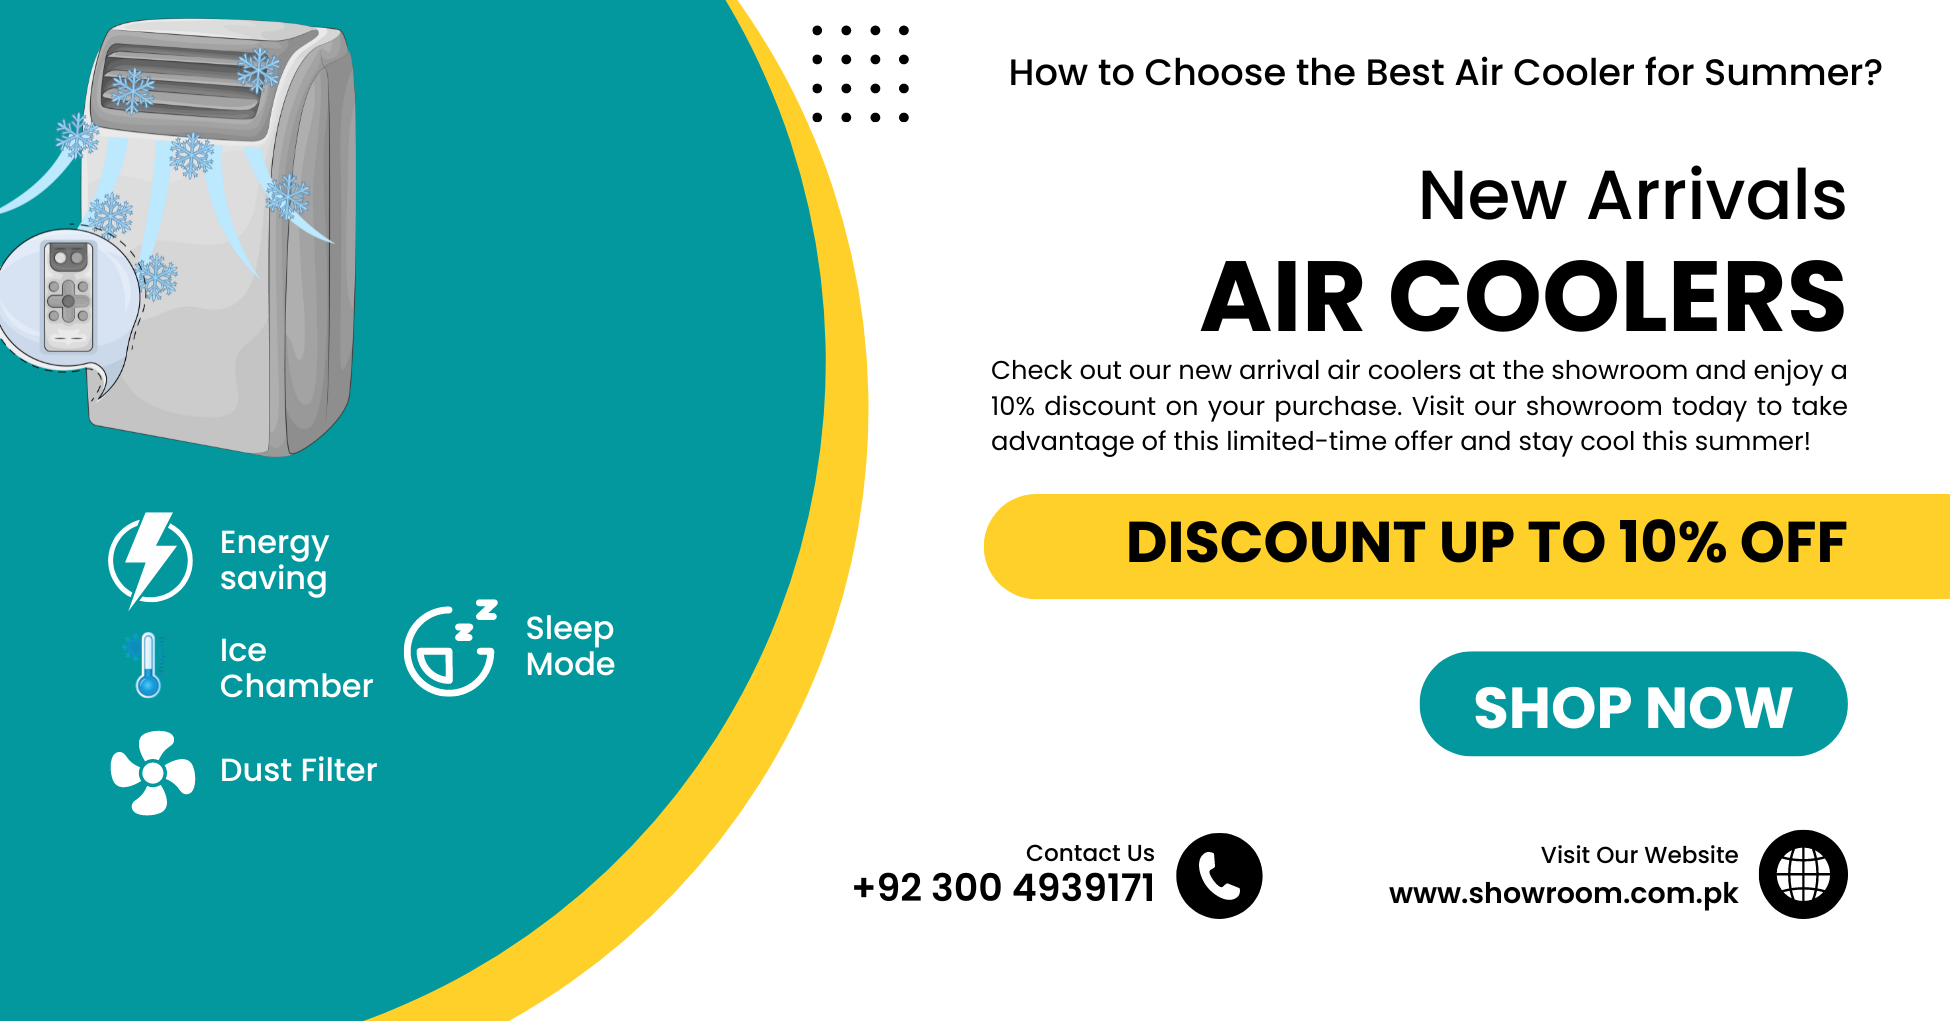 How to Choose the Best Air Cooler for Summer?